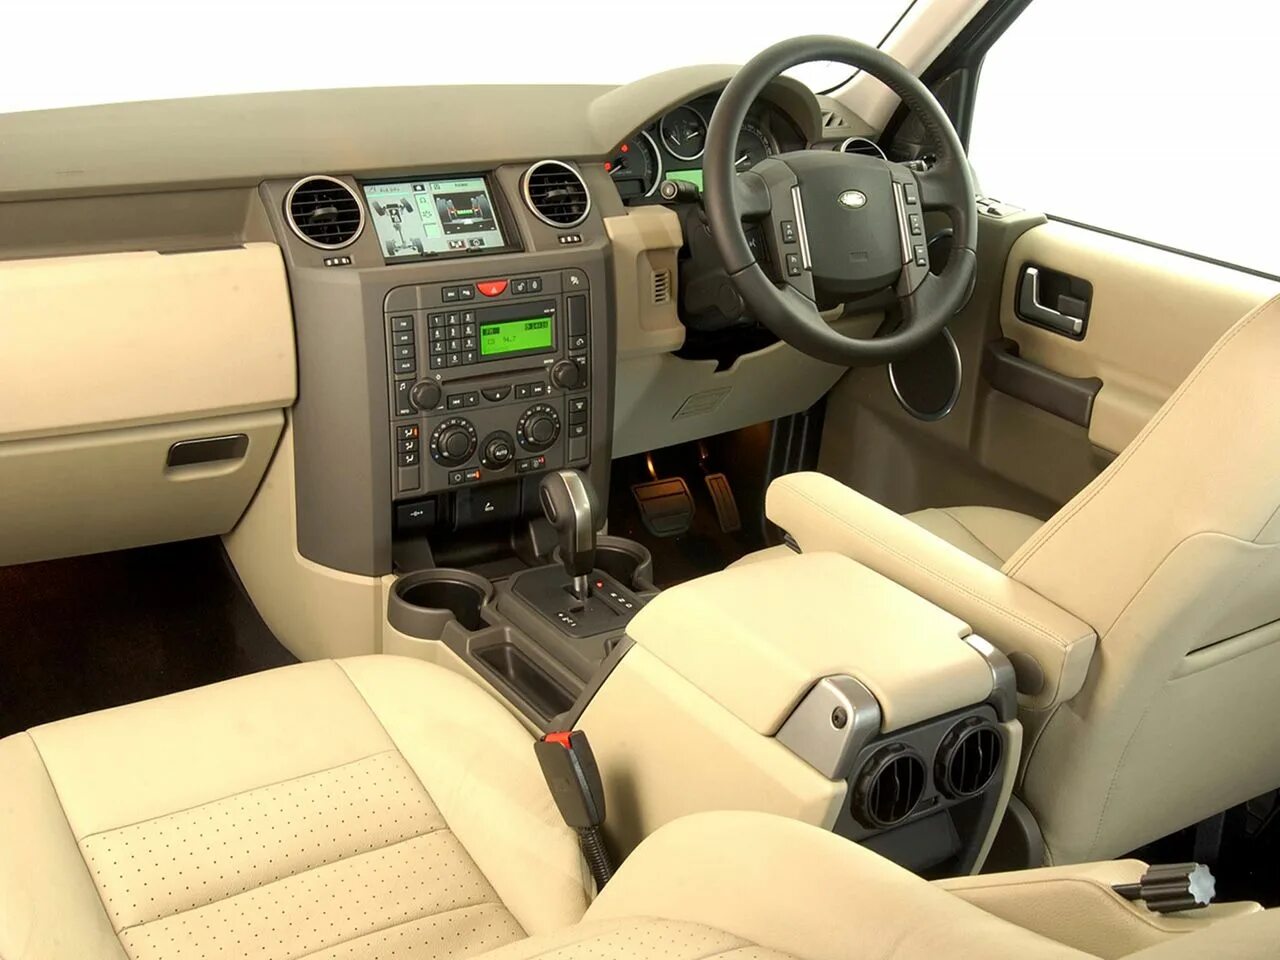 Land Rover Discovery 3 2005. Land Rover Discovery 3 салон. Land Rover Discovery 3 Interior. Лэнд Ровер Дискавери 3 салон. Разборка дискавери